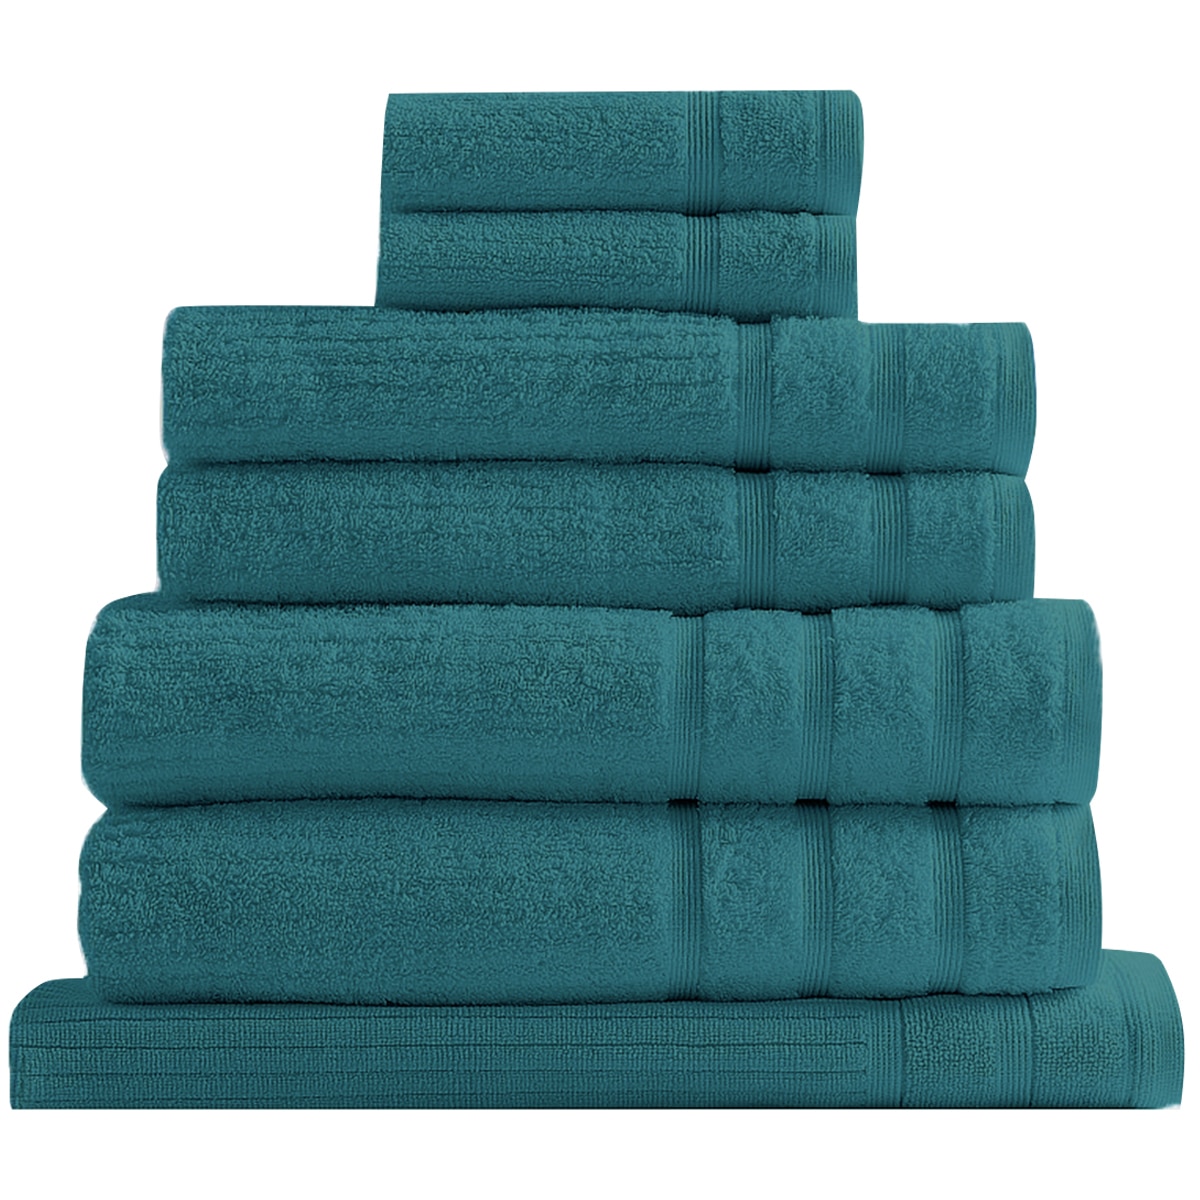 Bdirect Royal Comfort Eden 600GSM 100% Cotton 8 Piece Towel Pack - Turquoise